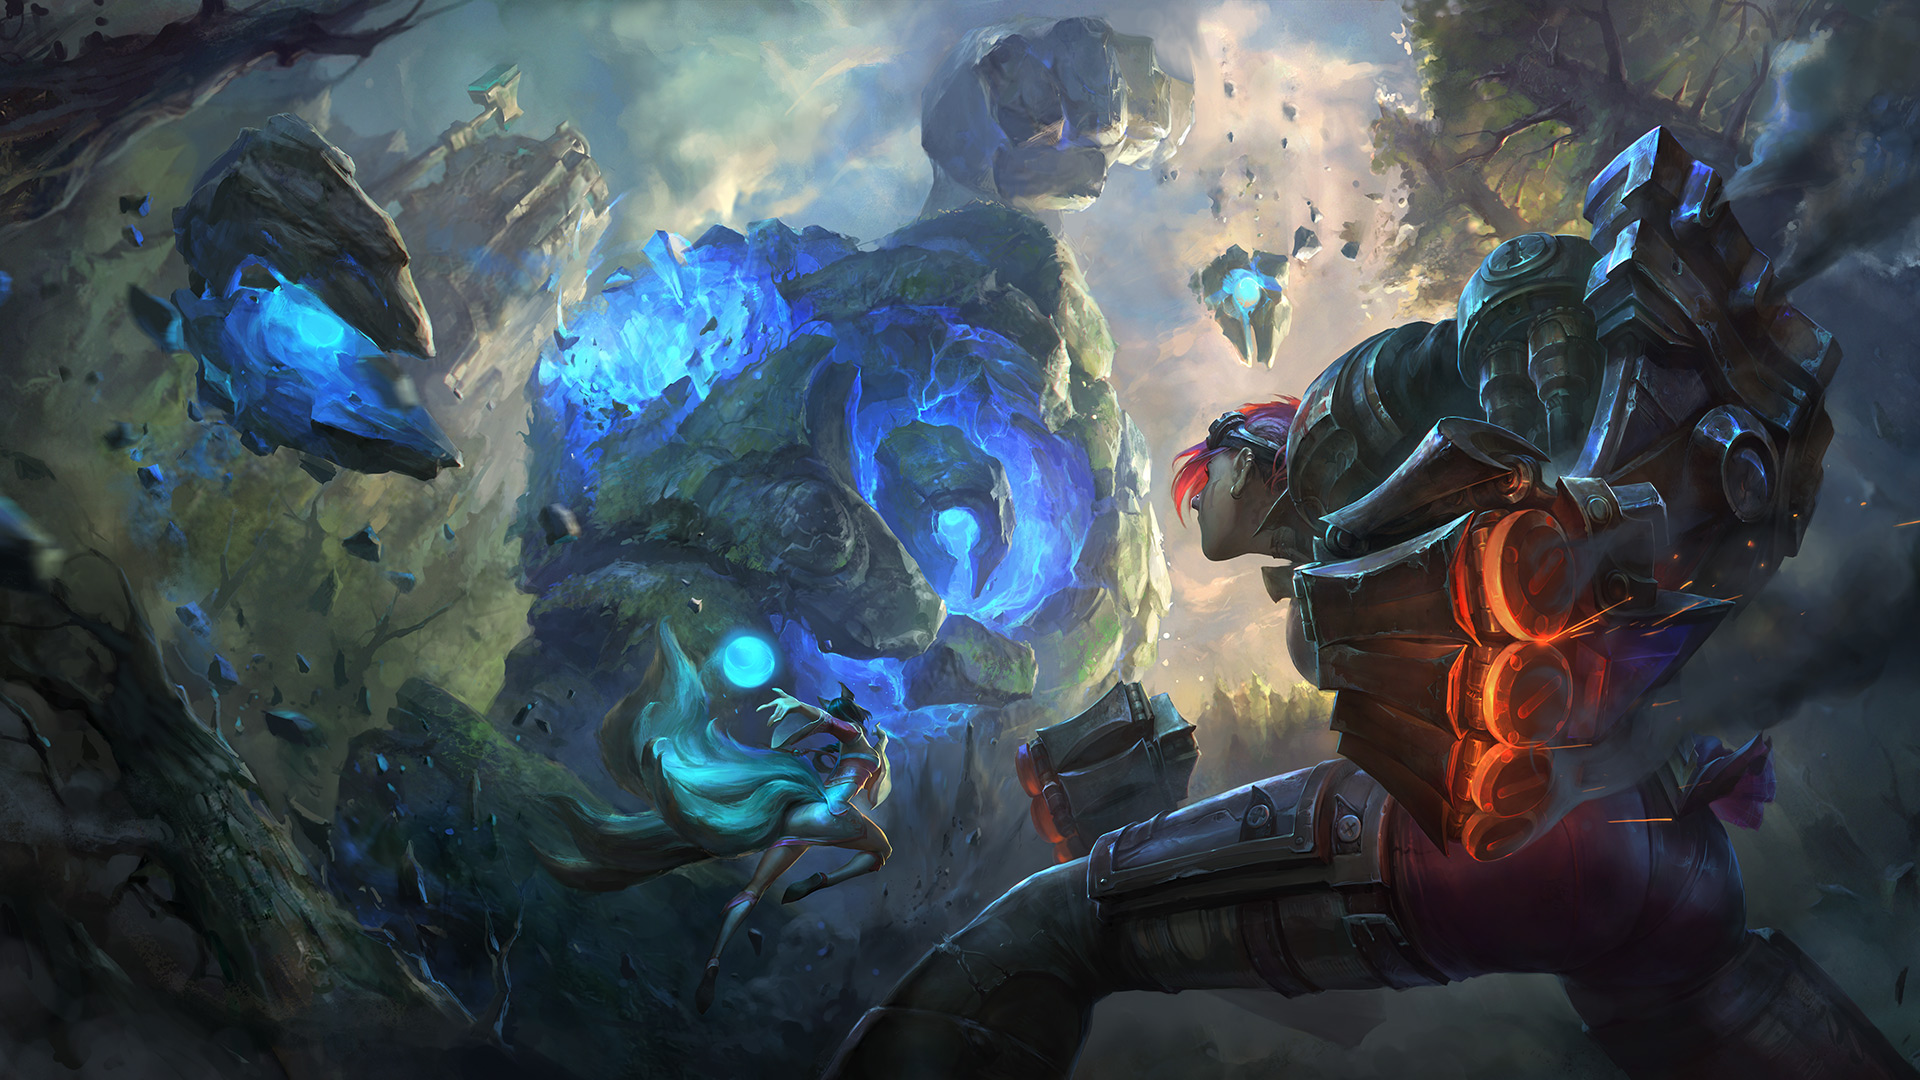 8 Easy Steps to Making Your League of Legends Build Perfect